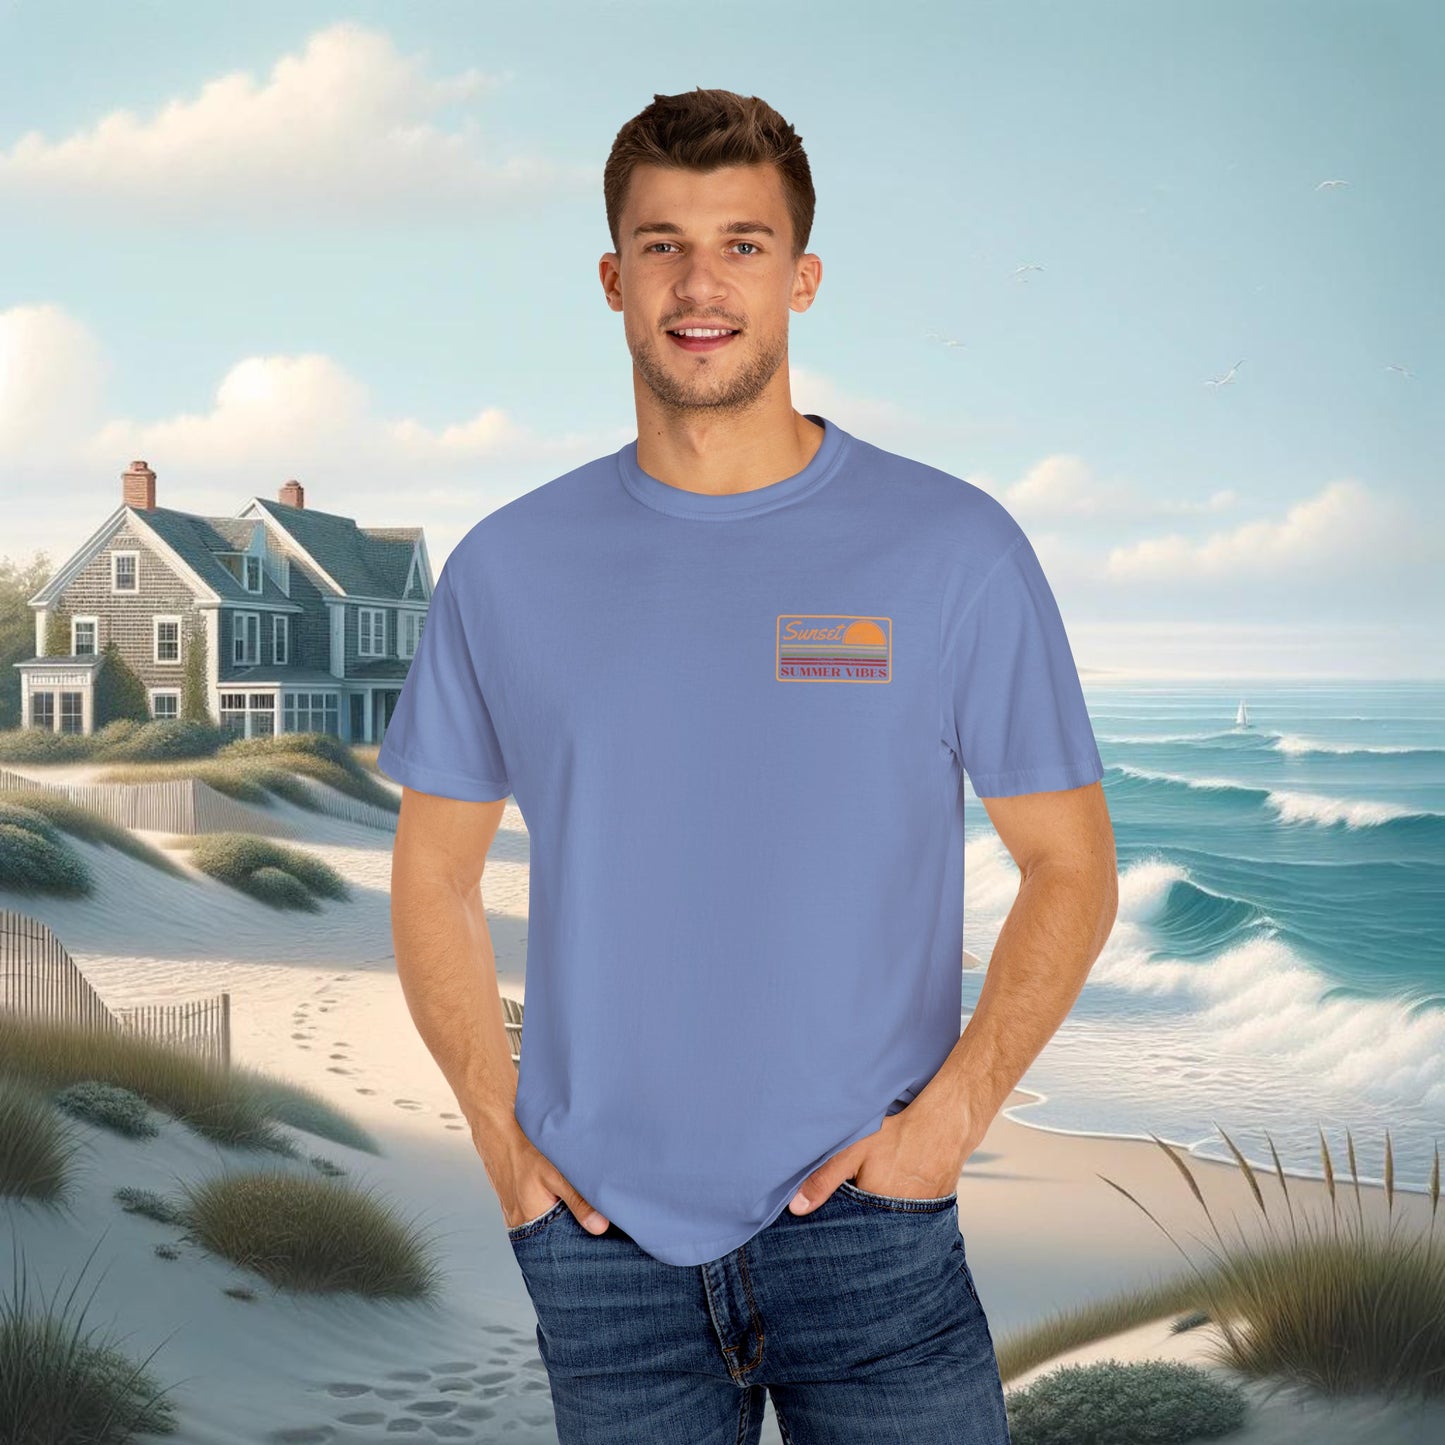 Summer Vibes Beachy T-Shirt - Comfort Colors 1717, 100% Ring-Spun Cotton, Relaxed Fit